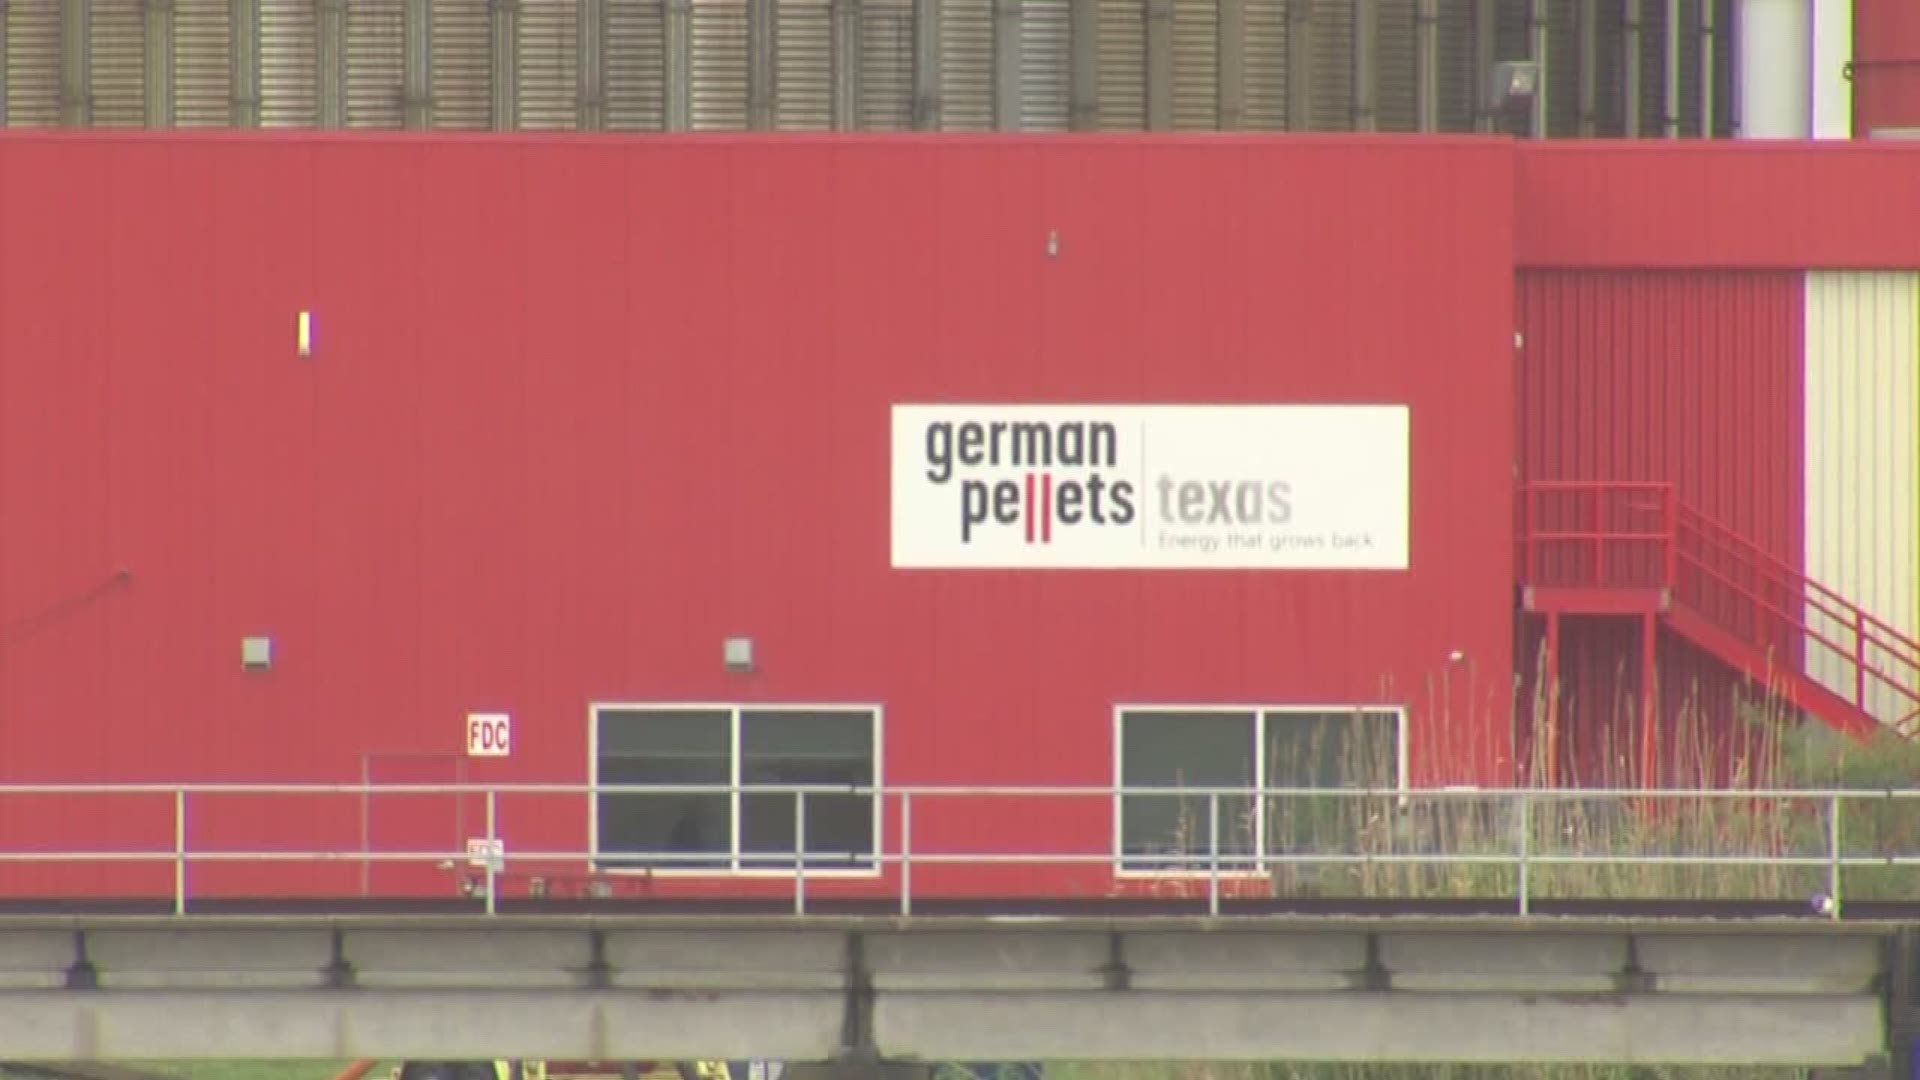 German Pellets Texas is experiencing its second fire in three months at the Port of Port Arthur. Carla Francis who can see the smoking silos from her porch says that smoke filled her house late Saturday night, and caused her sick father to go on his breat